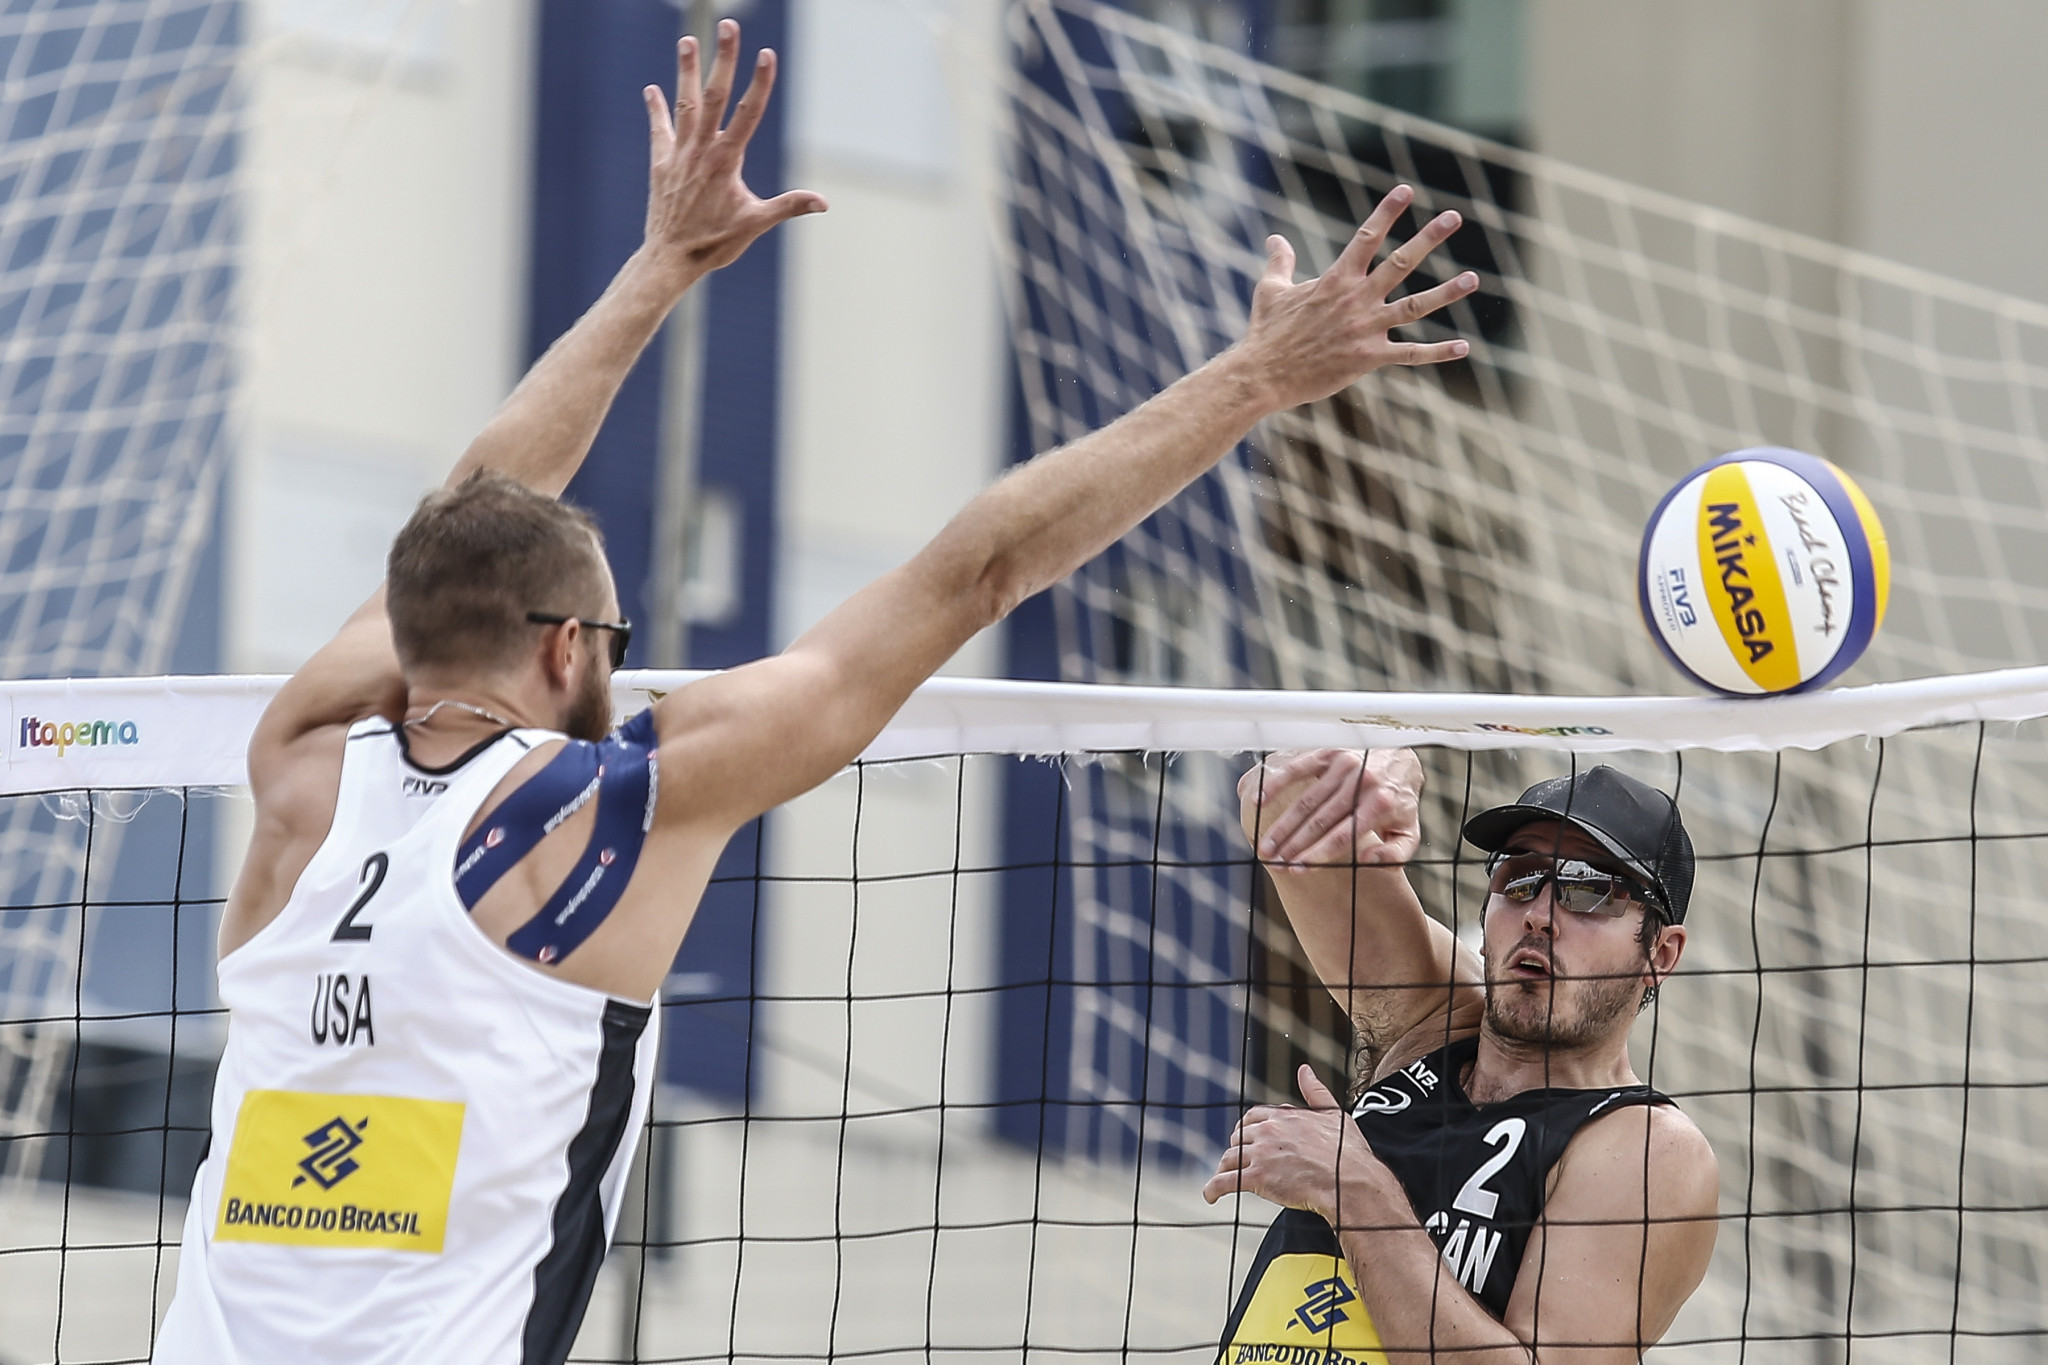 Reid Priddy and Theo Brunner of the United States are into the main draw at the FIVB Beach Volleyball World Series Itapema Open in Brazil ©FIVB